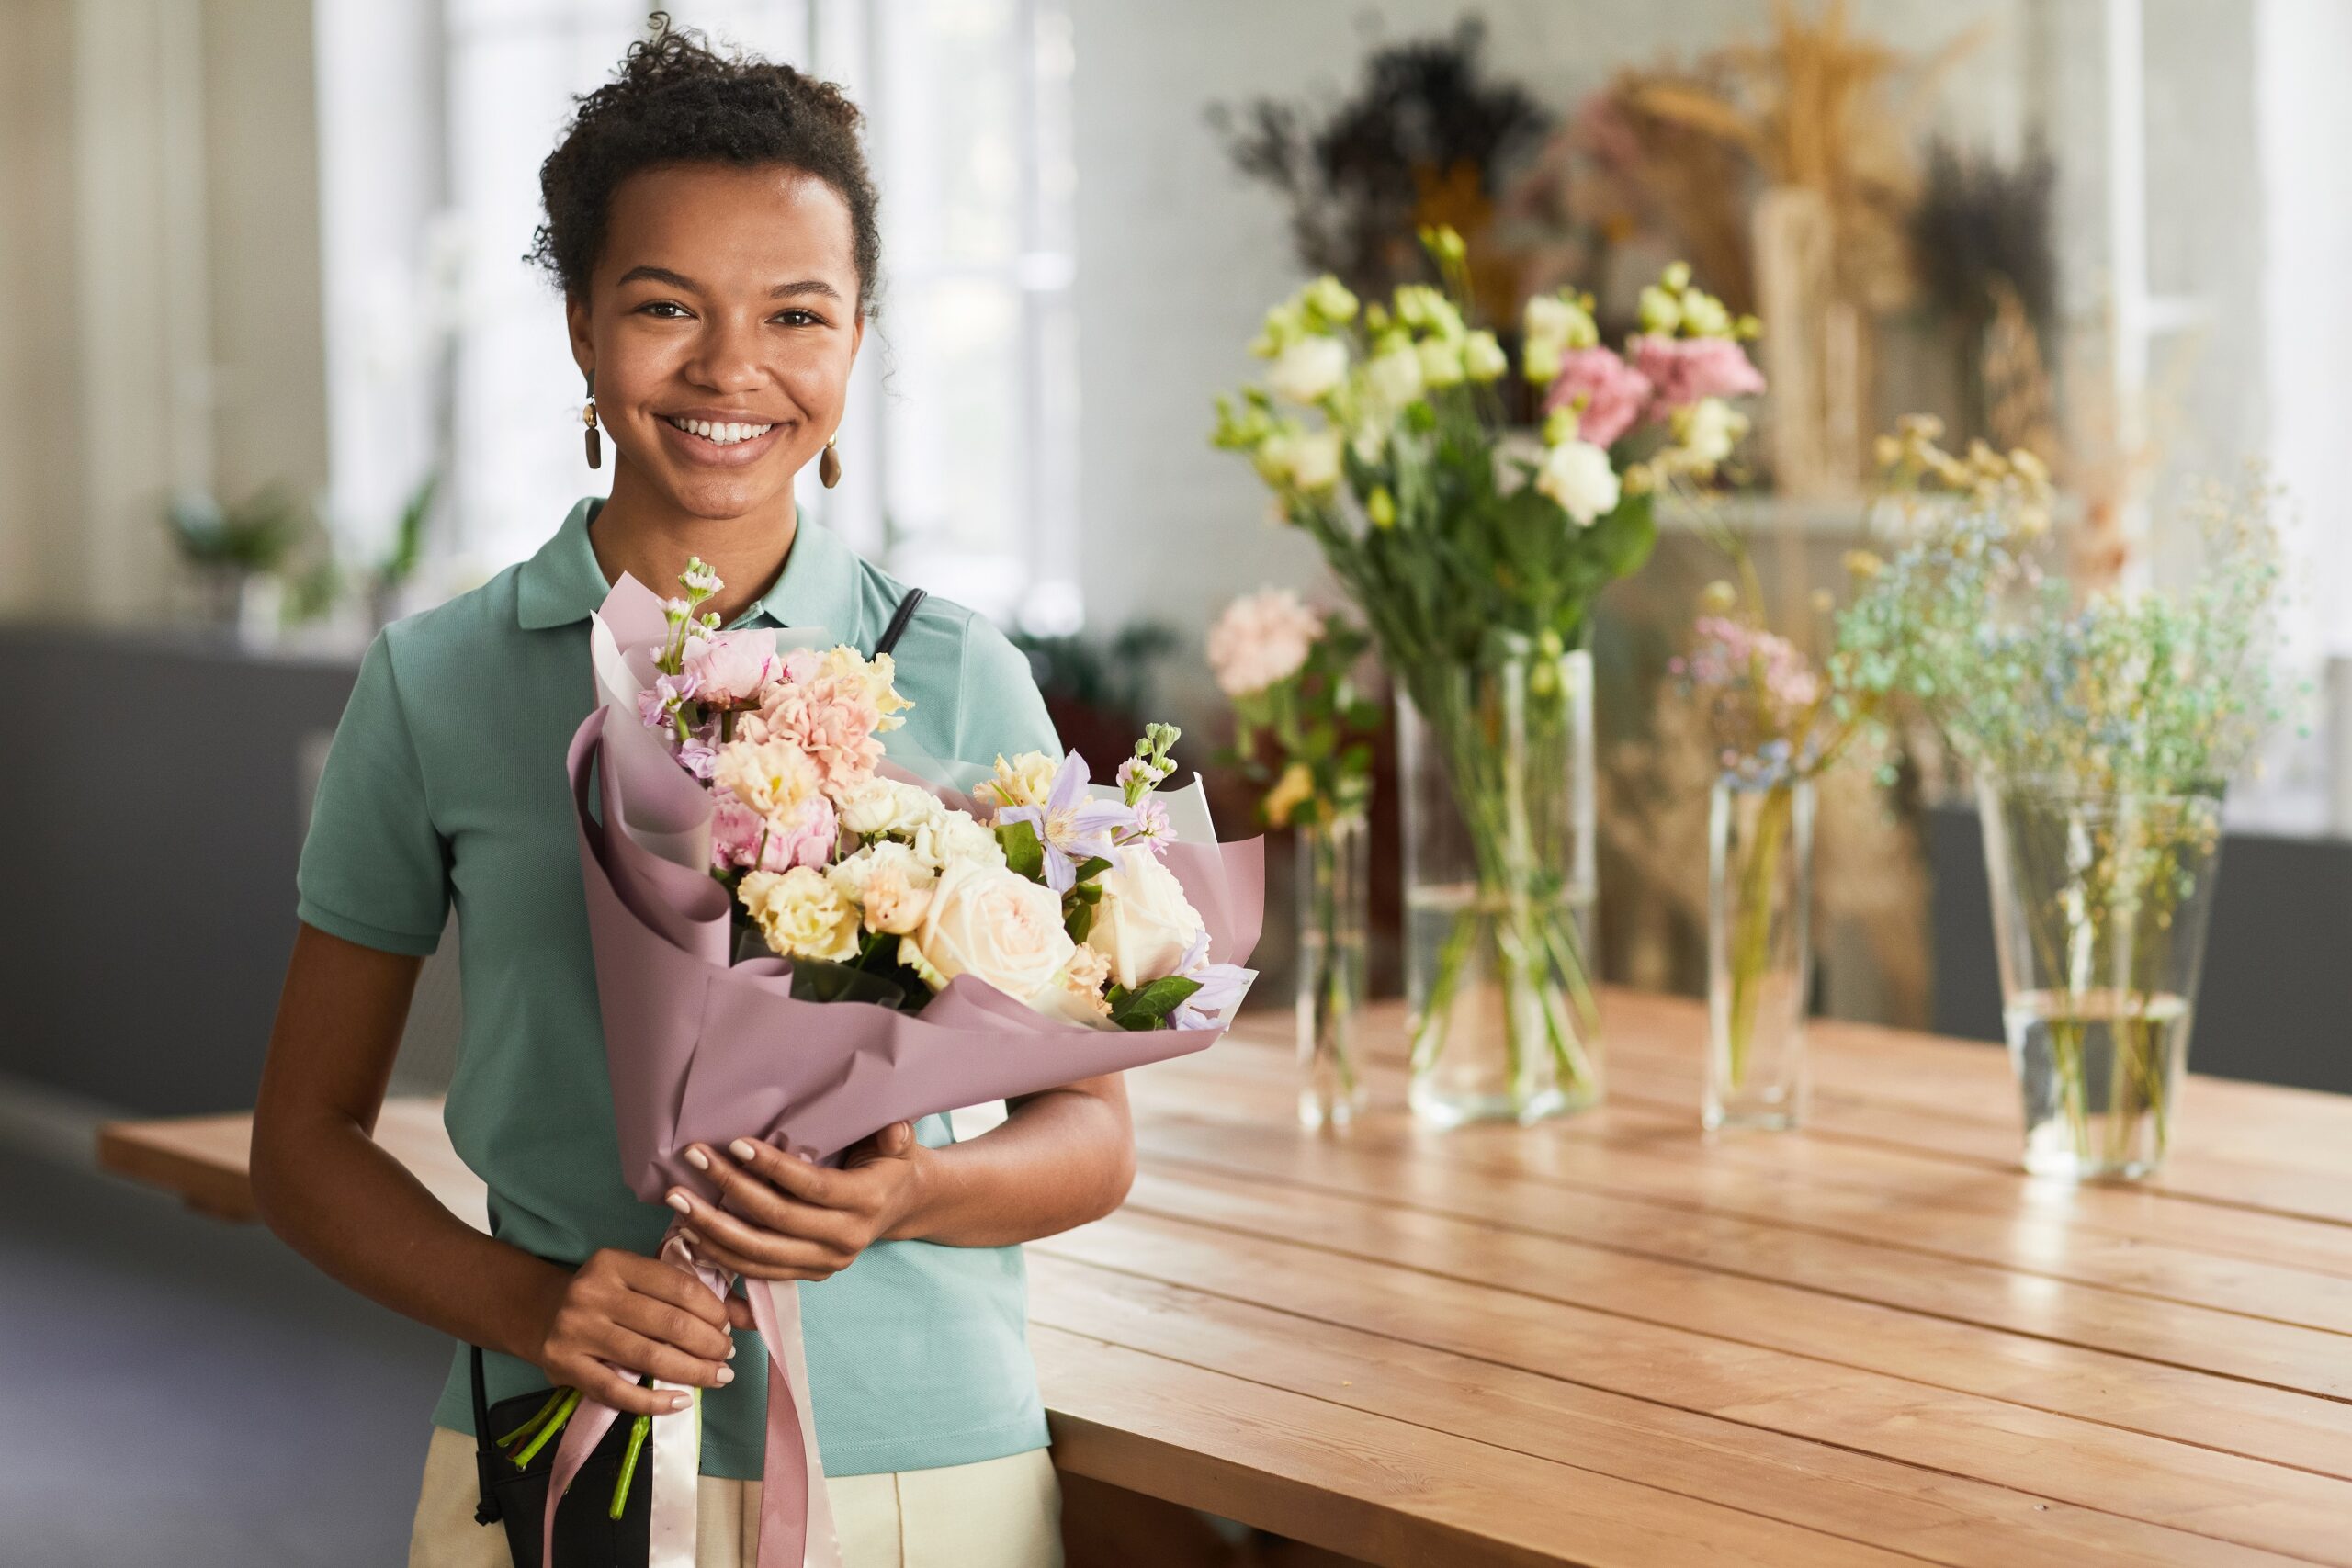 Waist up portrait of smiling young woman holding flowers in flower shop and looking at camera, copy space